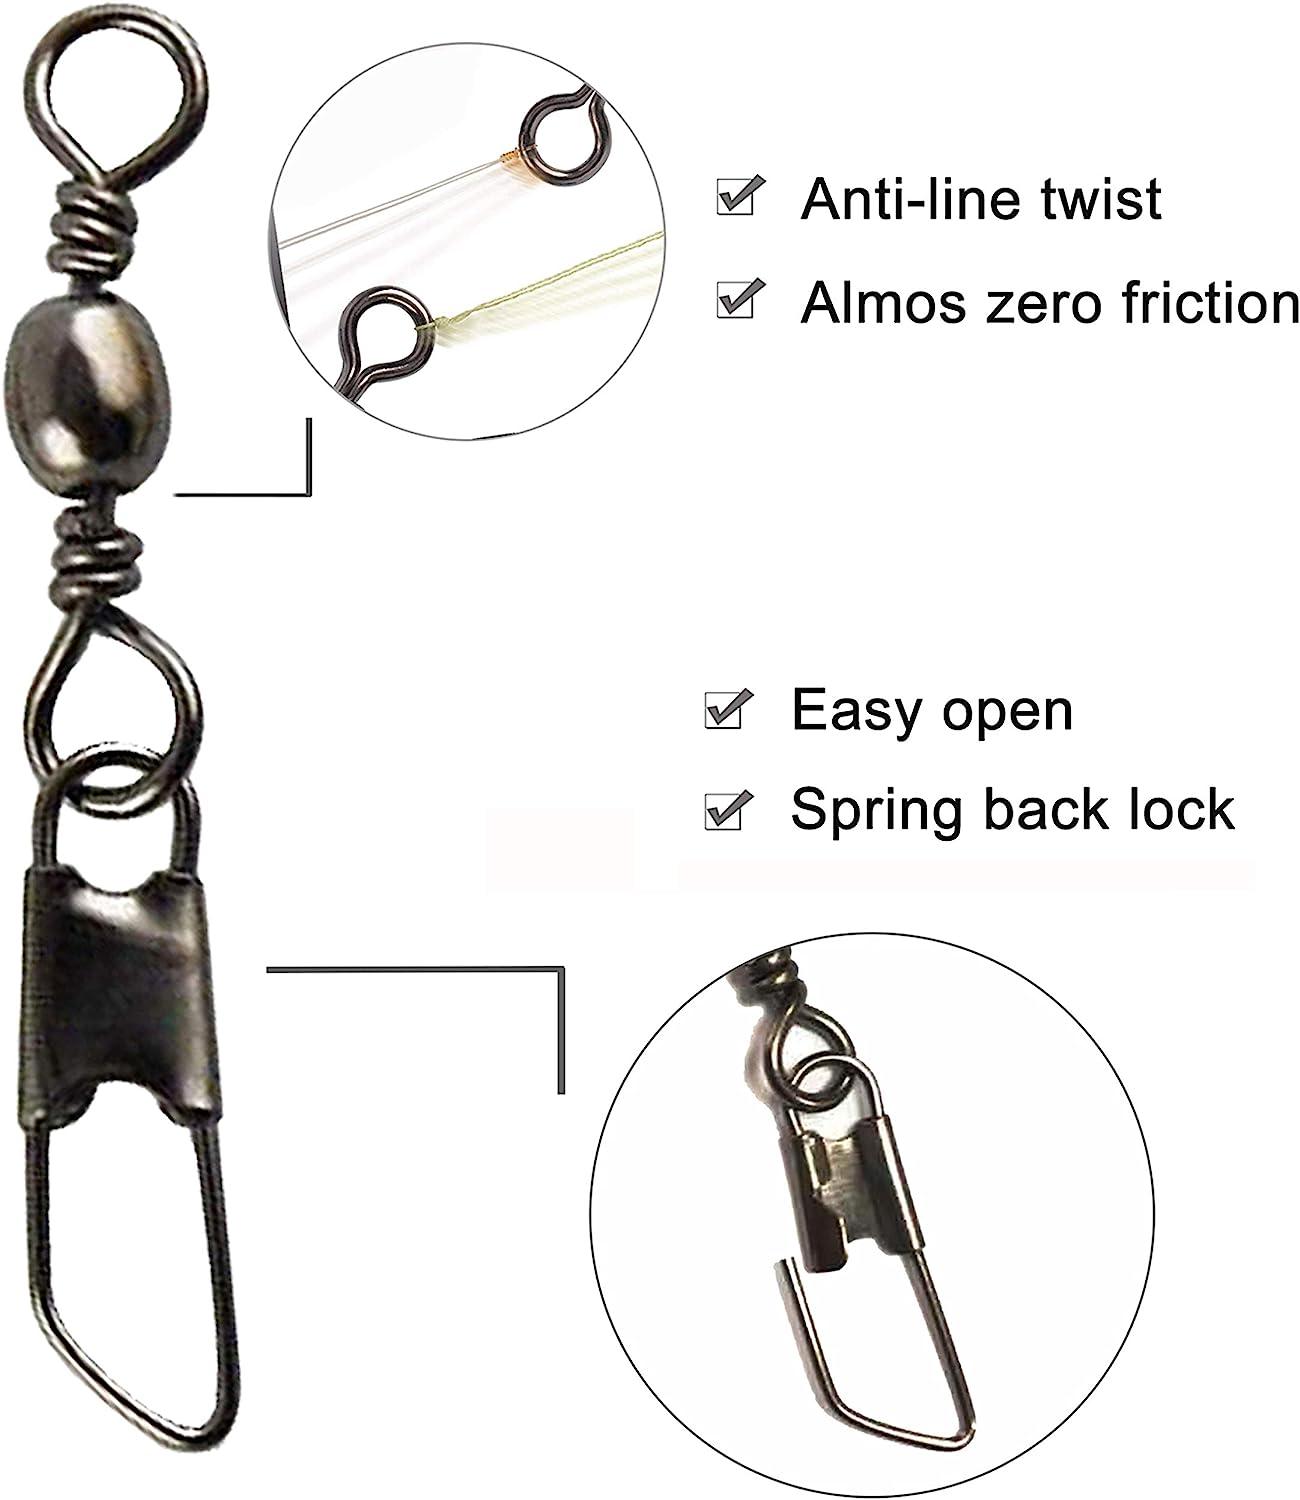 100pcs Stainless Steel Fishing Swivel Swivels Connector With Double Snap  Lock Fishing Line Connector Fishing Swivels For Outdoor Fishing 